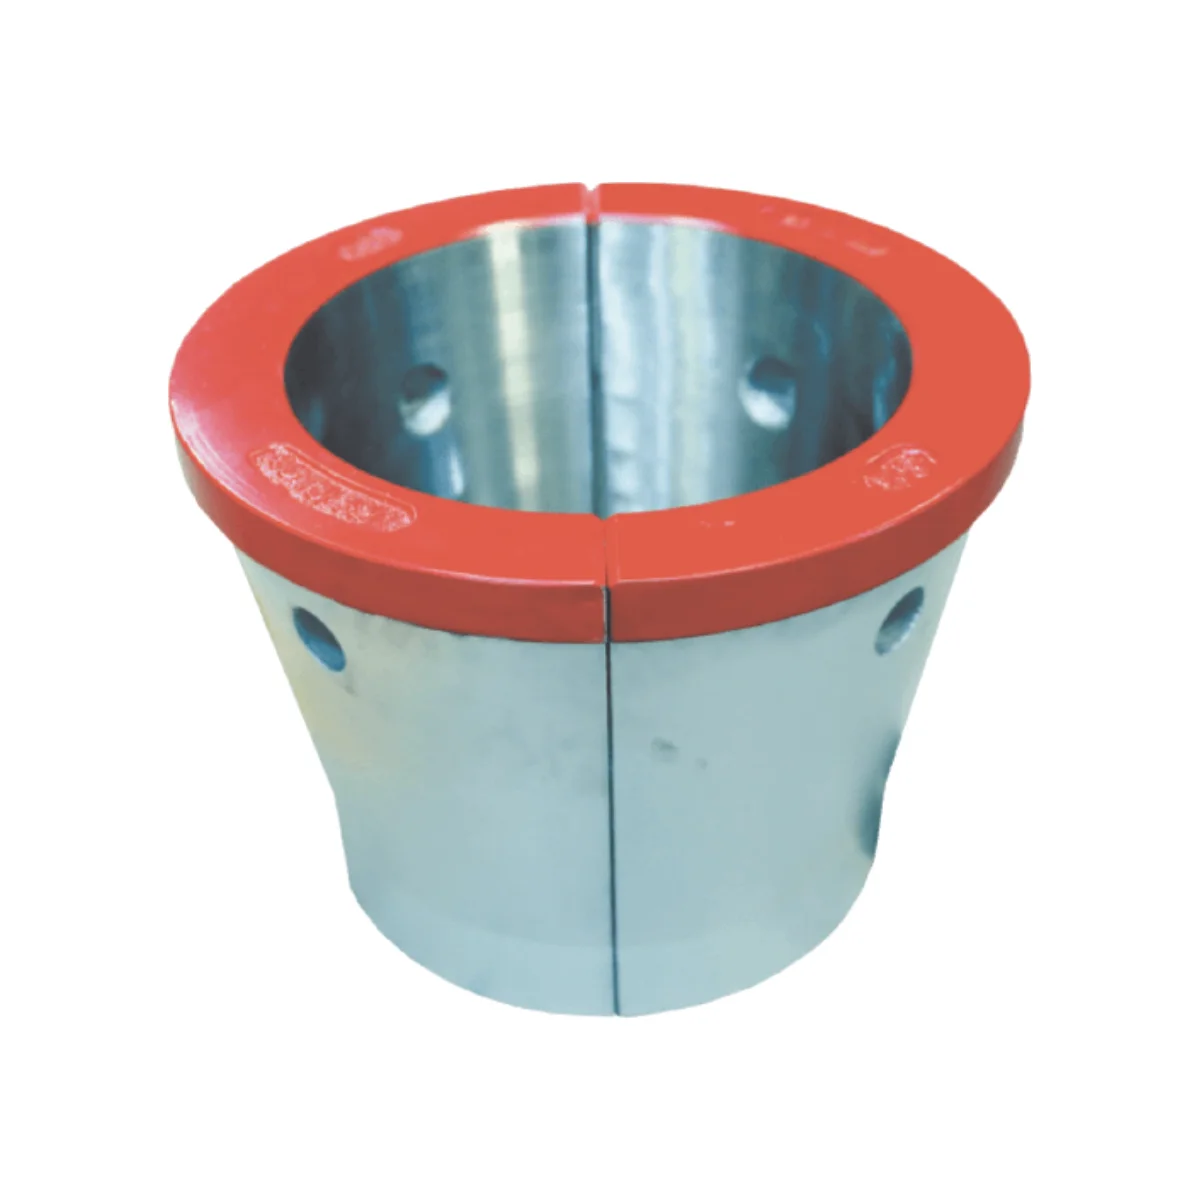 Casing Bushing Bowl No. 3 securely holds casing strings, ensuring precise alignment and reliable support in oilfield drilling operations.